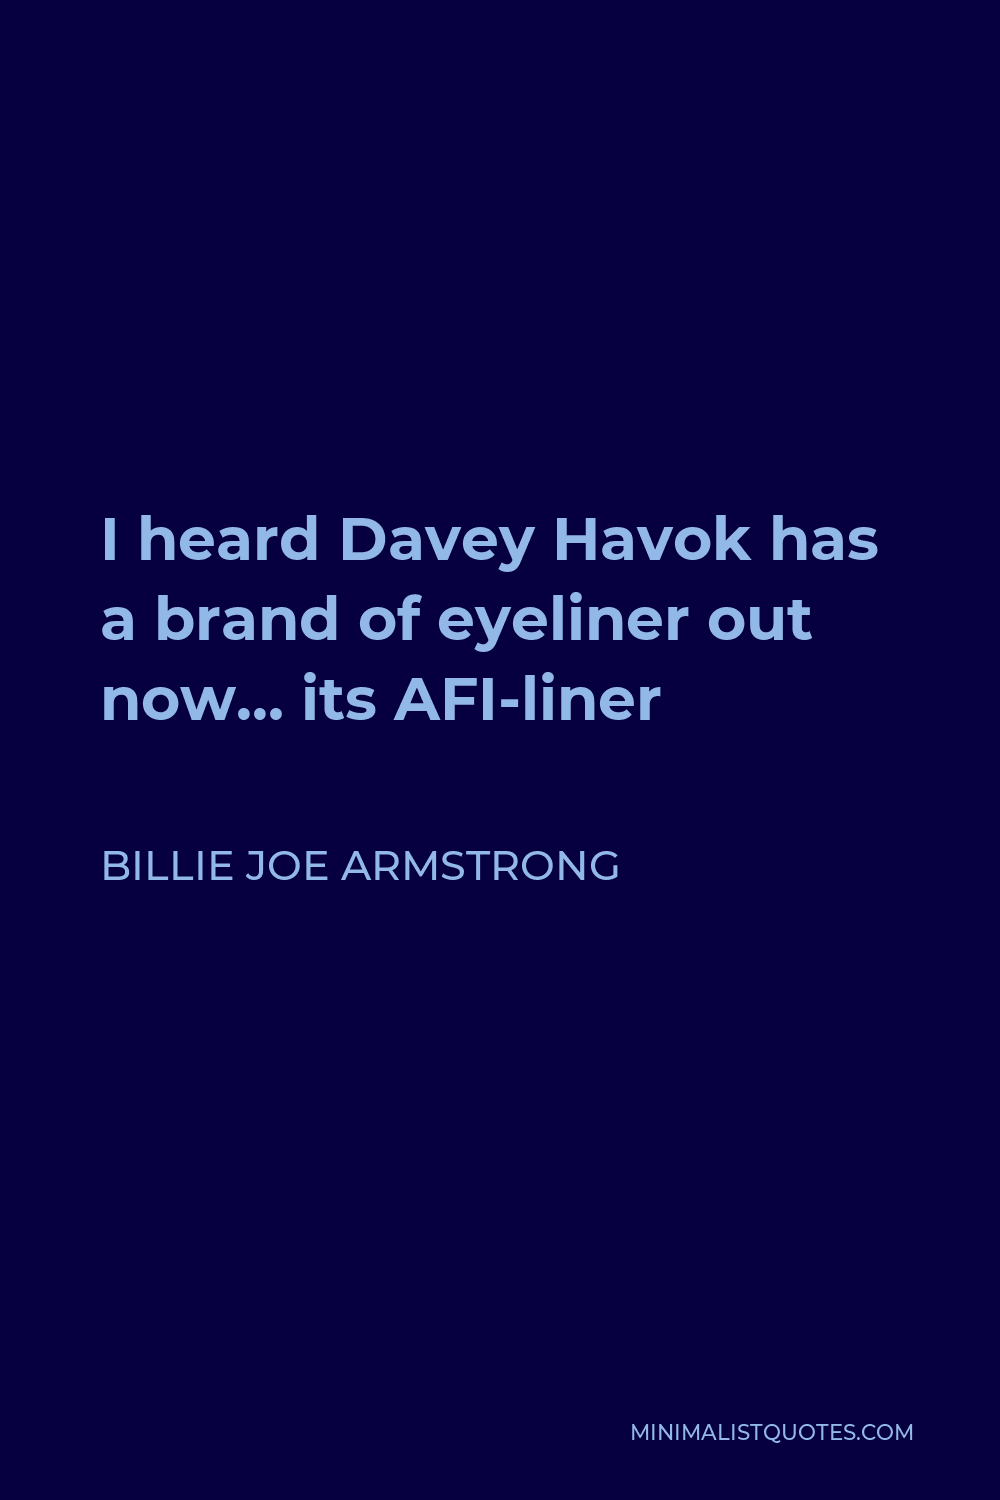 Billie Joe Armstrong Quote - I heard Davey Havok has a brand of eyeliner out now… its AFI-liner